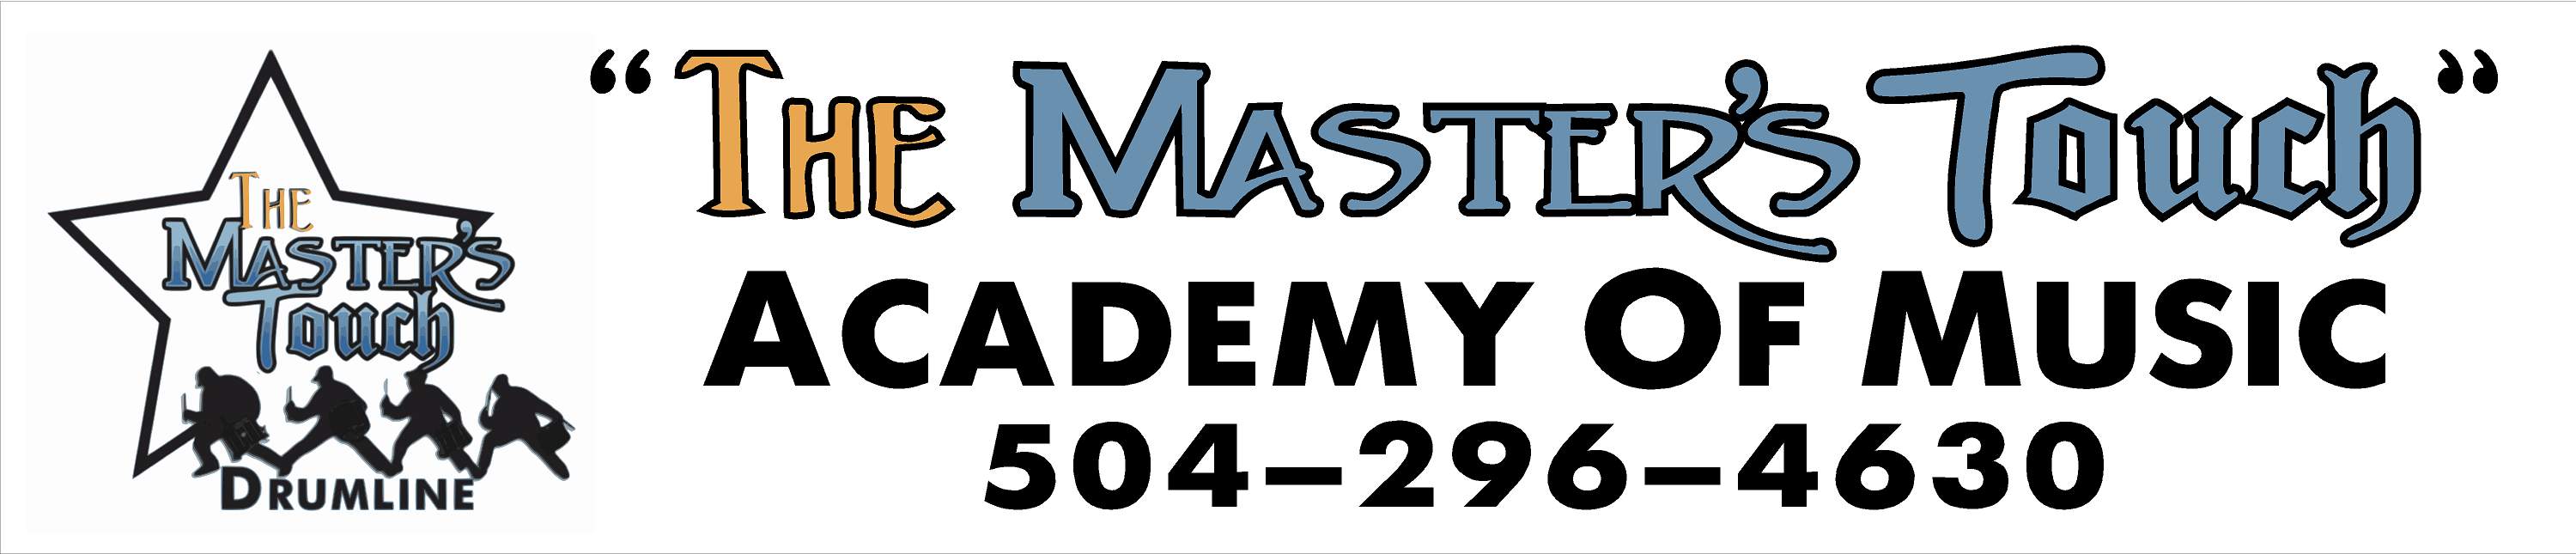 the master's touch building sign.jpg